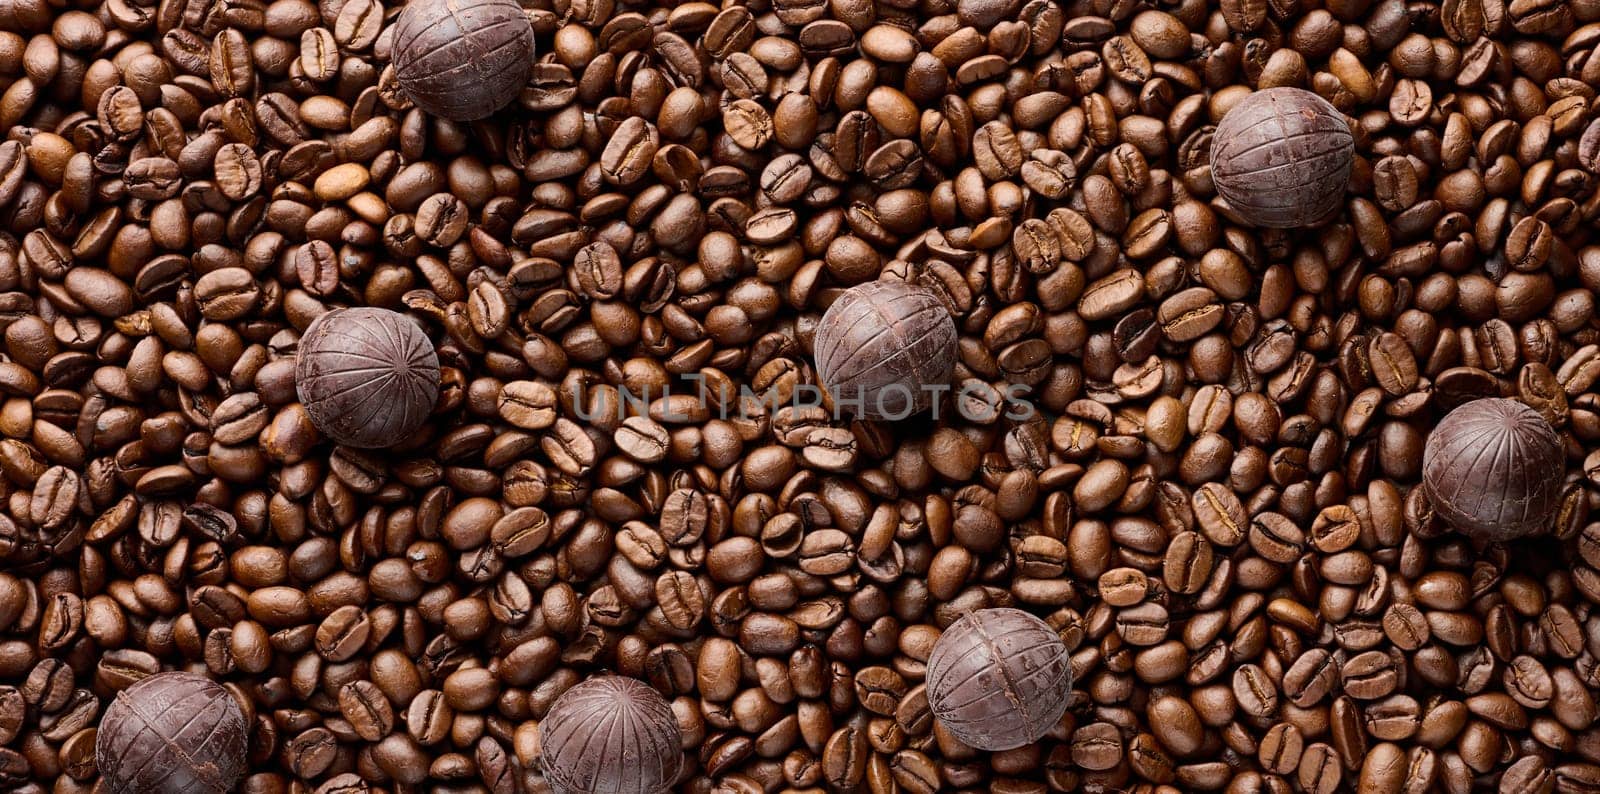 Scattered roasted coffee beans and round chocolate candies by ndanko